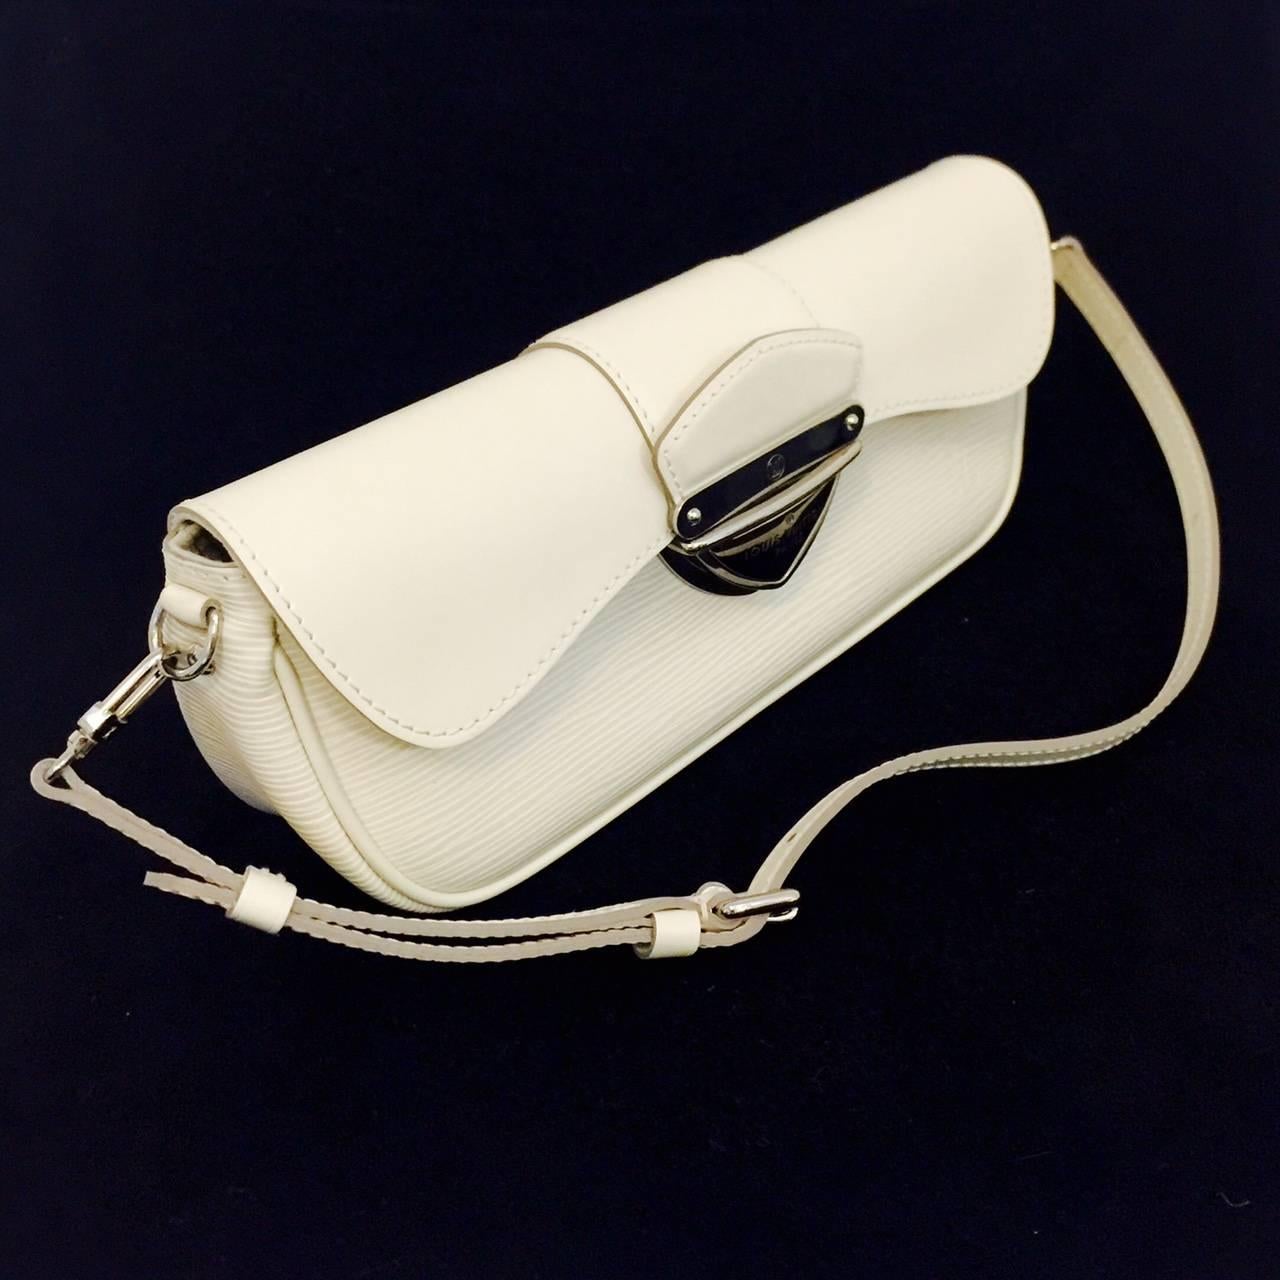 Ivorie Epi leather Montaigne clutch is a must for any collection celebrating all things 